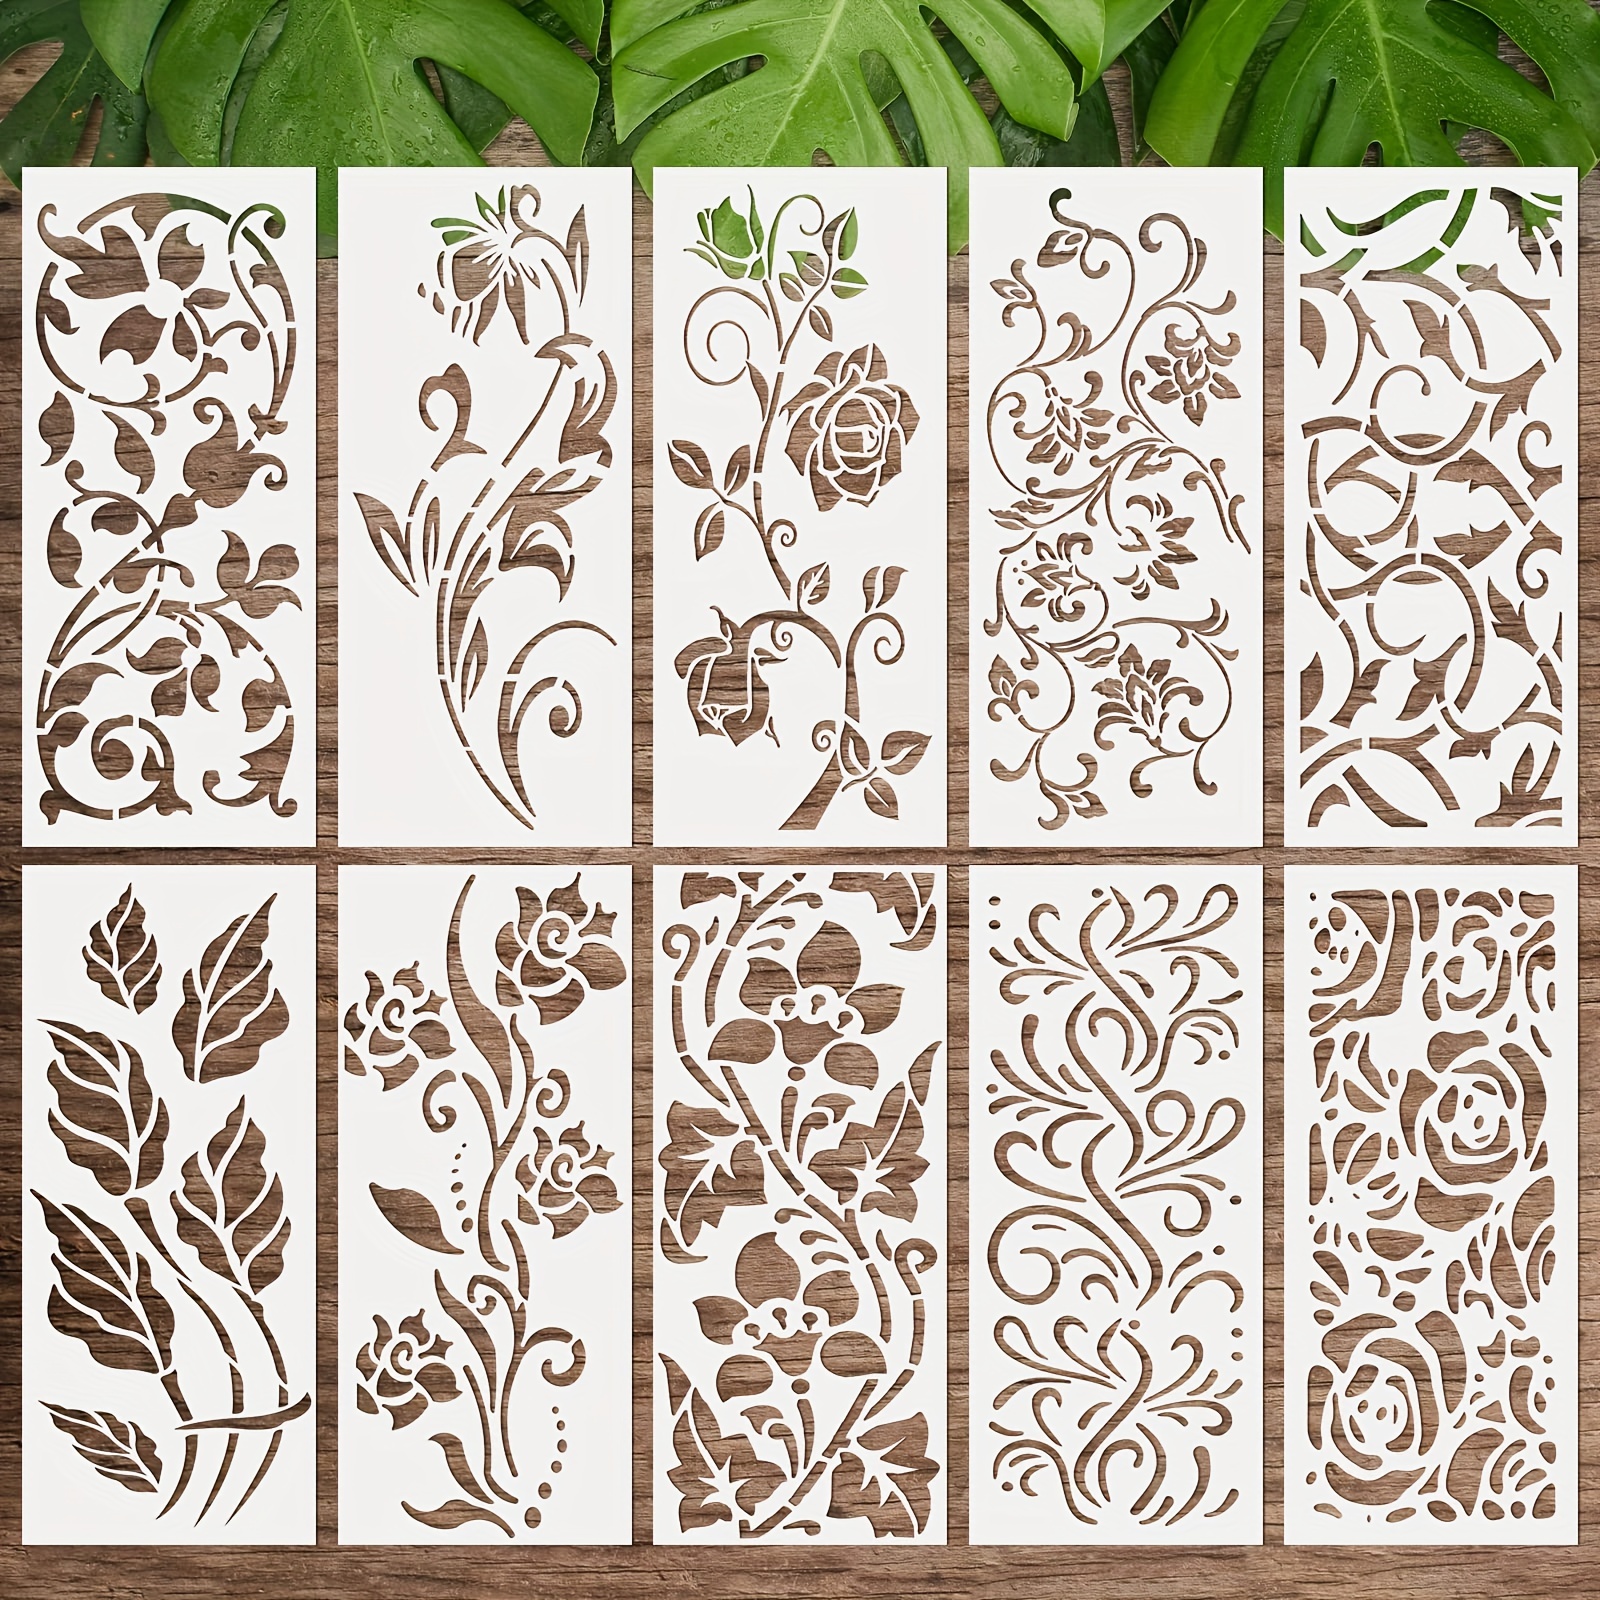 Scroll Wall Stencil Border | 2320 by Designer Stencils | Pattern Stencils |  Reusable Stencils for Painting | Safe & Reusable Template for Wall Decor 